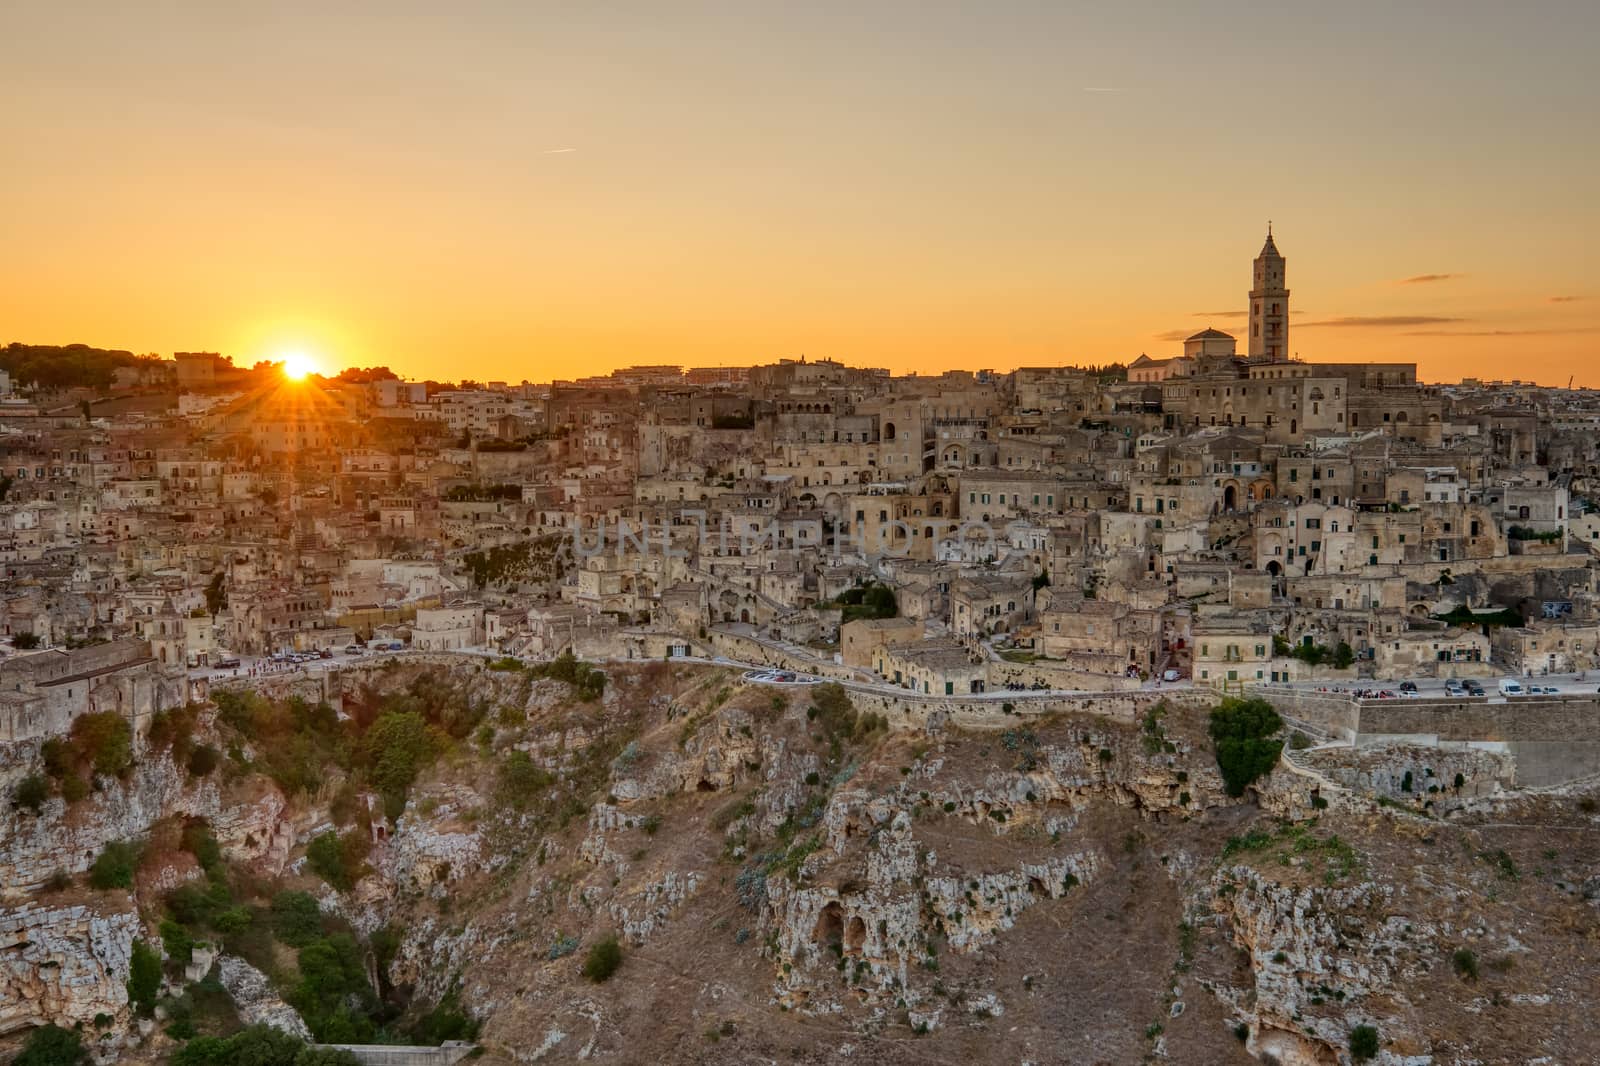 View of the beautiful old town of Matera in southern Italy at sunset